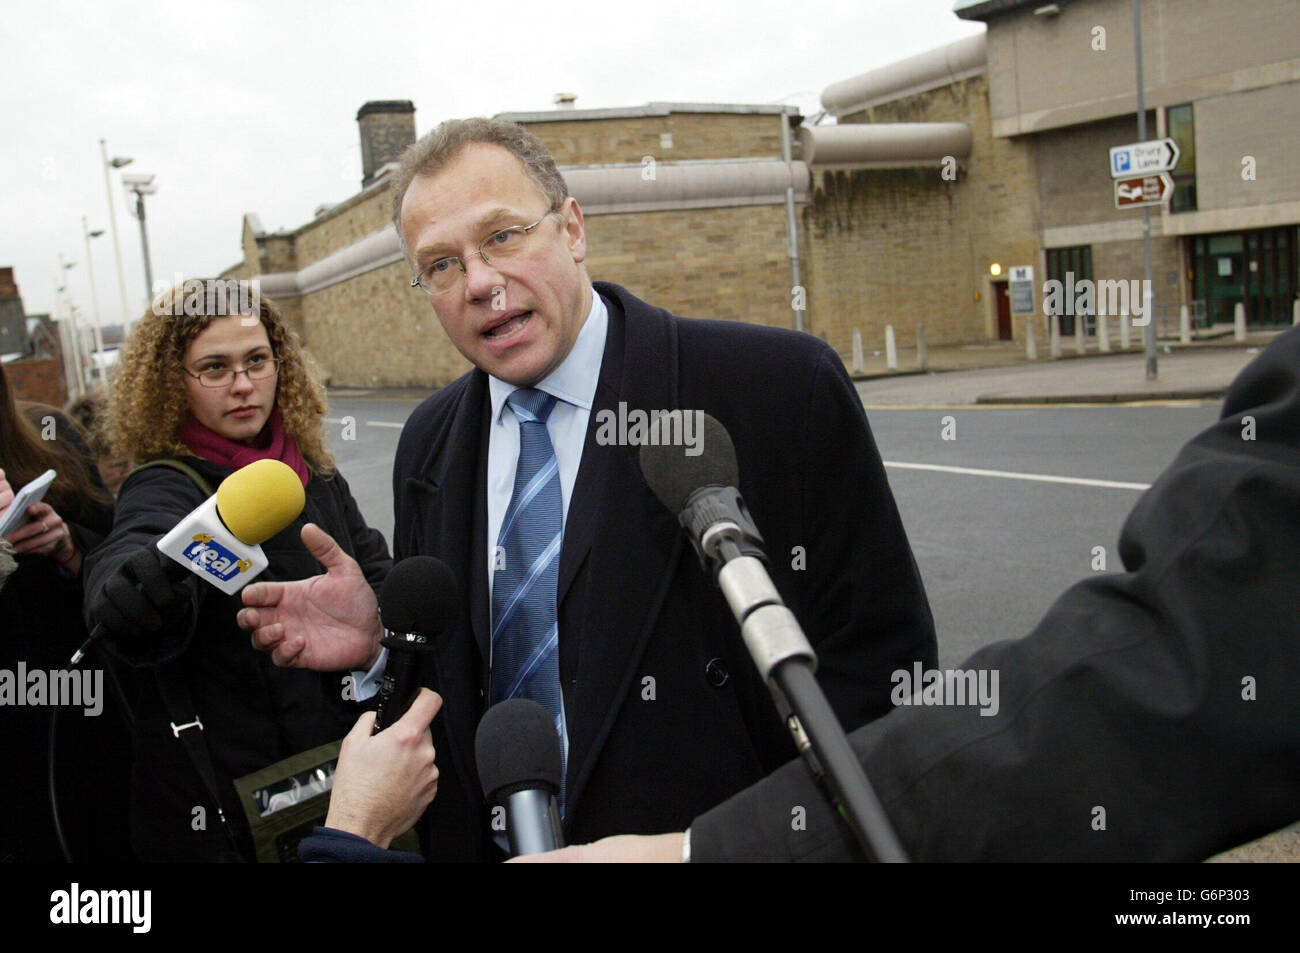 Mr Stephen Shaw, the Prisons and Probation Ombudsman, talks to the press during his visit to Wakefield Prison in West Yorkshire as he begins an independent inquiry into the death of Britain's most prolific serial killer doctor Harold Shipman yesterday. Shaw said the inquiry would look into whether warning signs that Shipman was planning suicide had been missed by prison authorities and would be conducted in 'as open a way as possible'. Stock Photo